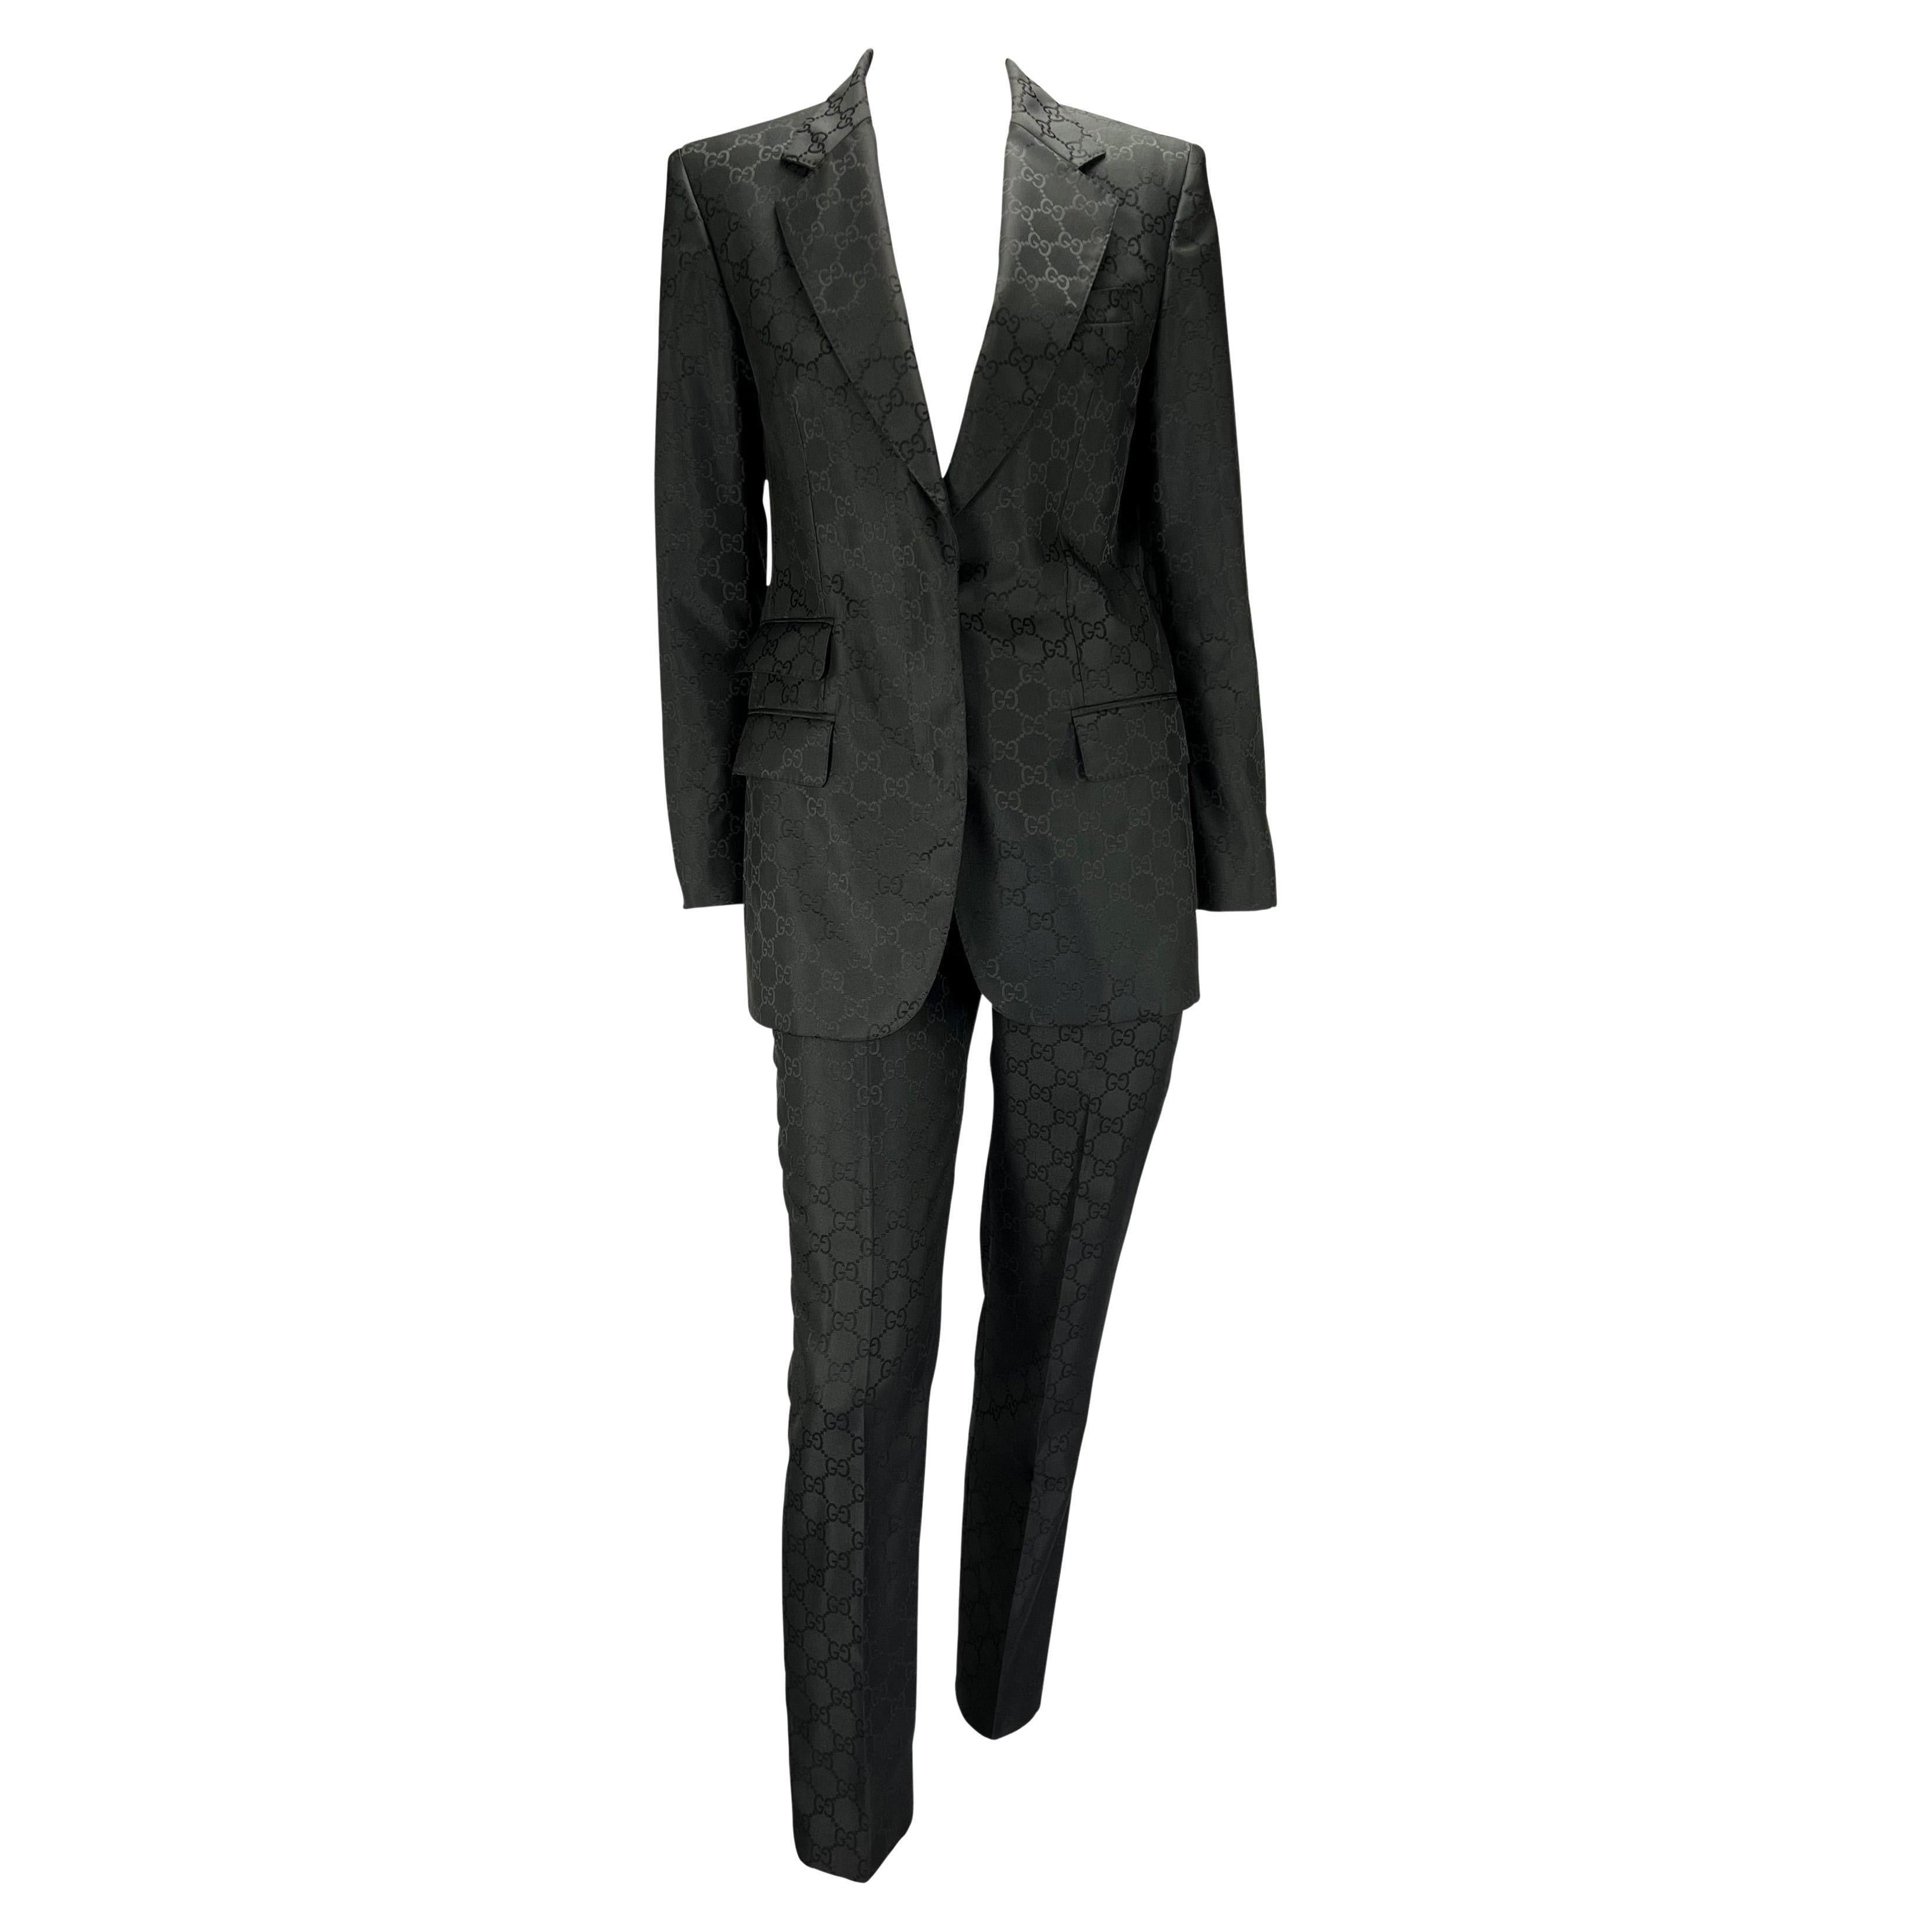 S/S 1998 Gucci by Tom Ford Runway GG Monogram Satin Black Pantsuit For Sale